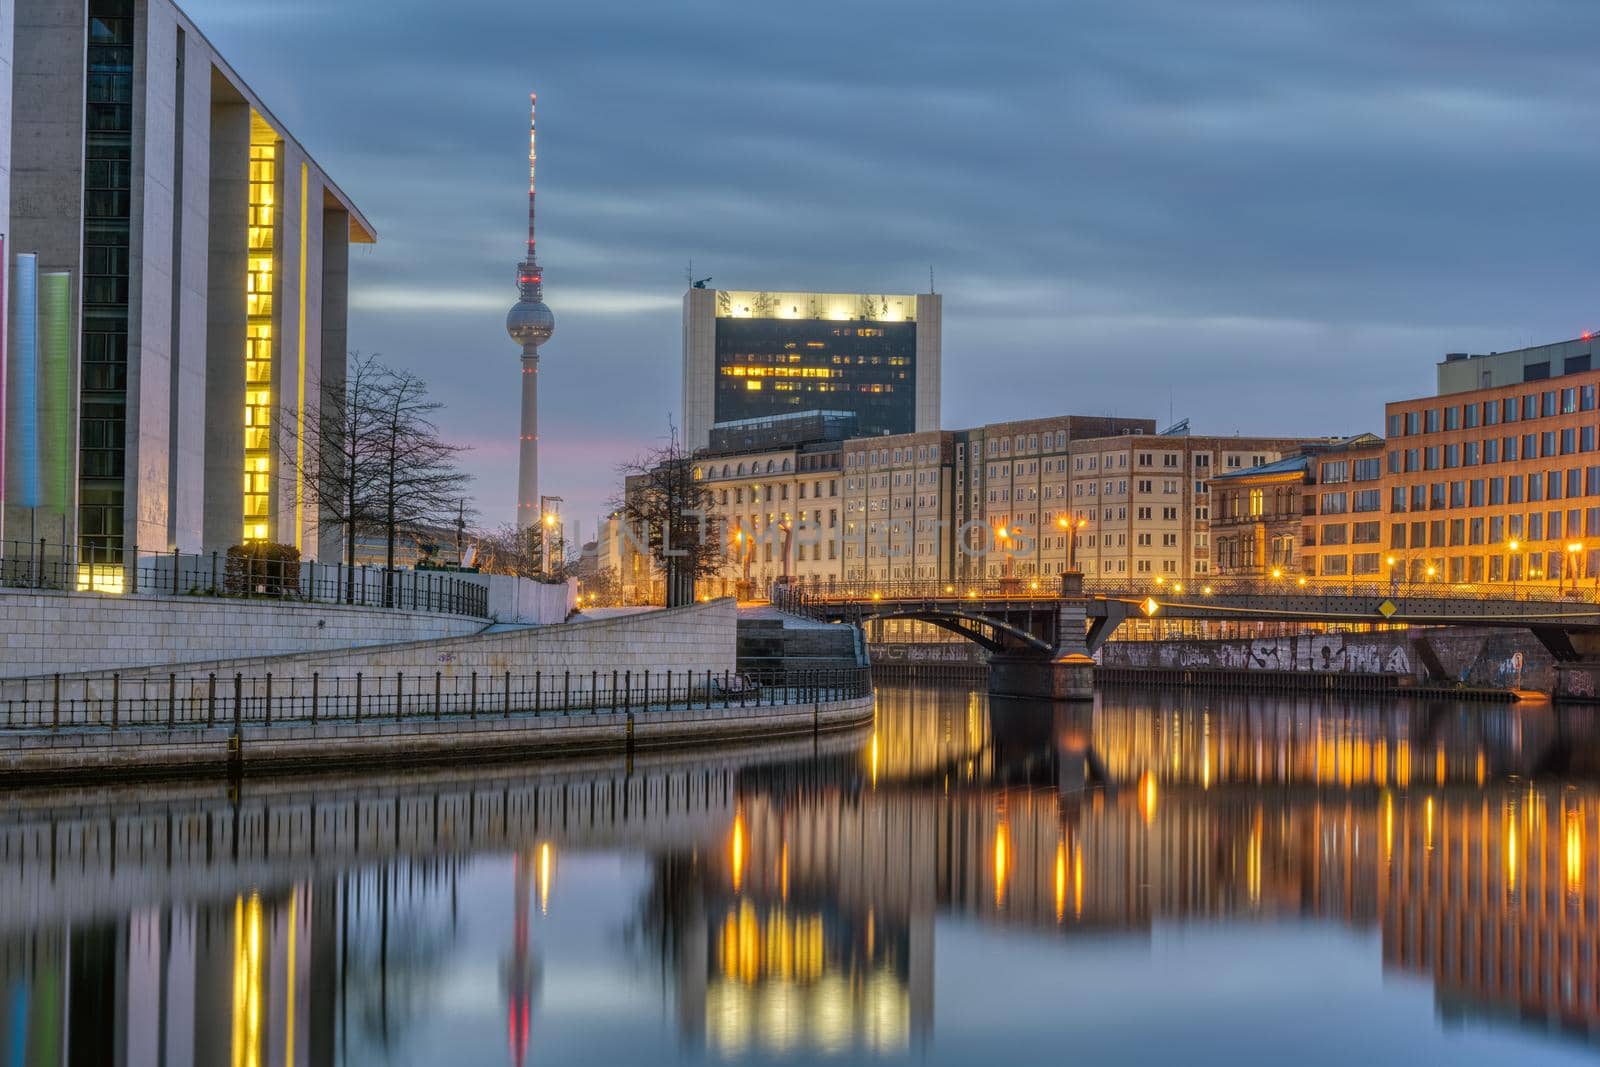 Dawn at the river Spree in Berlin with the Television Tower in the back